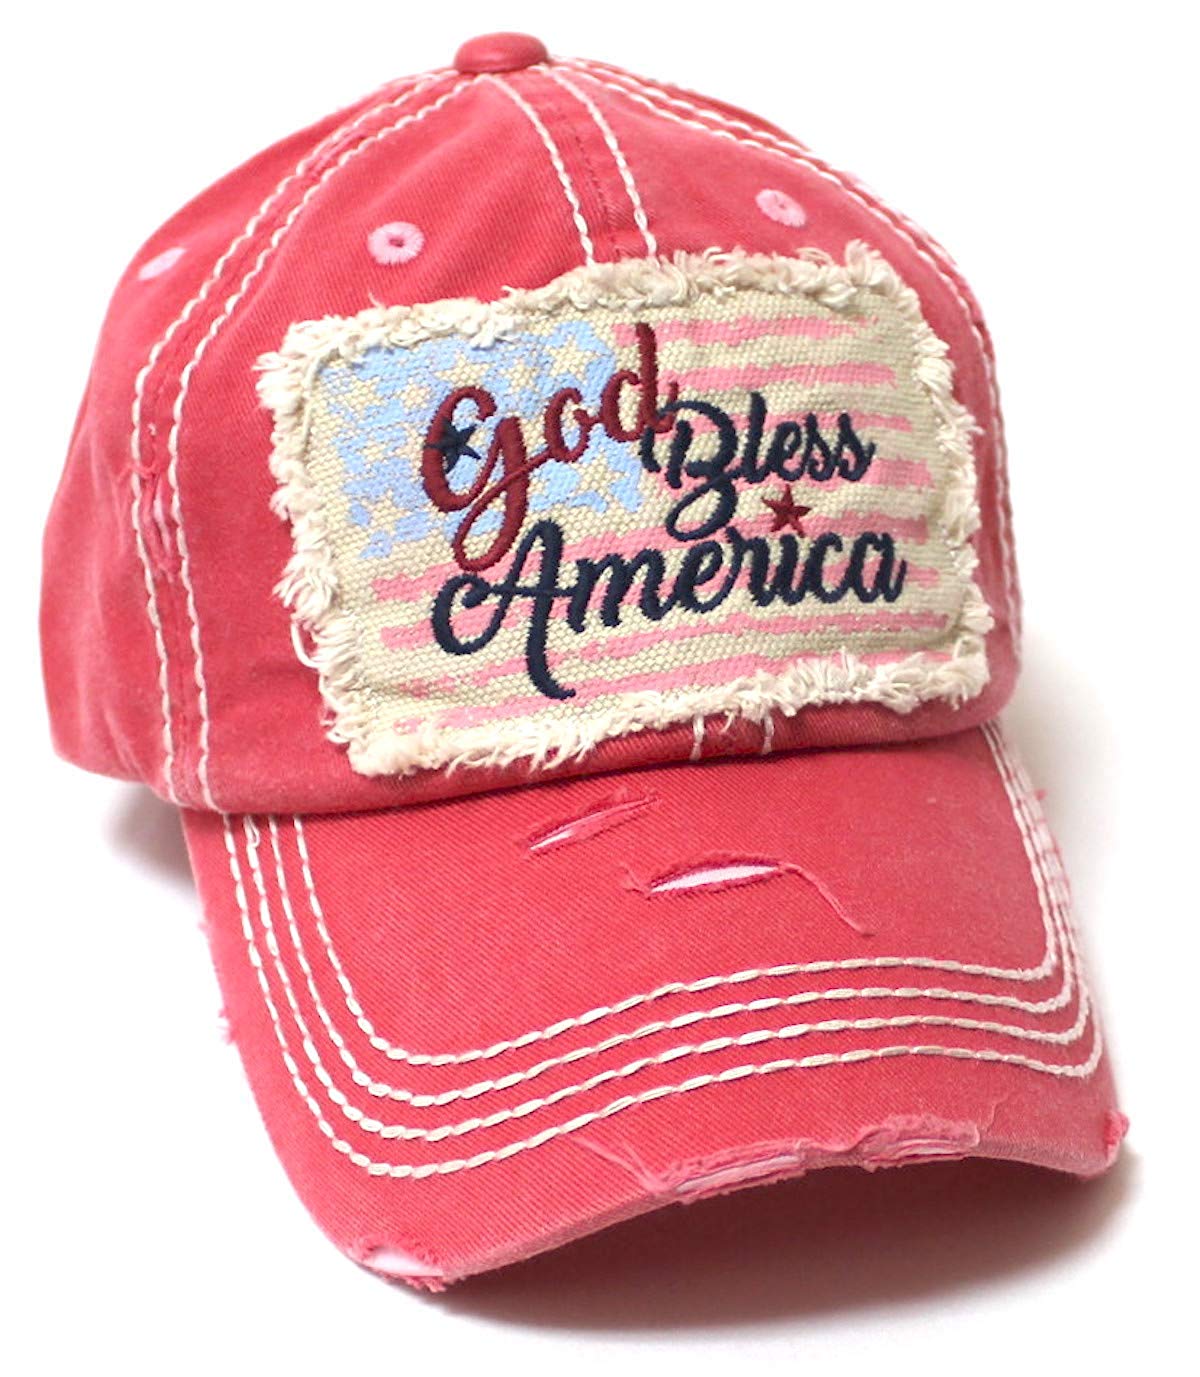 CAPS 'N VINTAGE USA Flag Patch God Bless America Embroidery Ballcap, Rose Pink - Caps 'N Vintage 